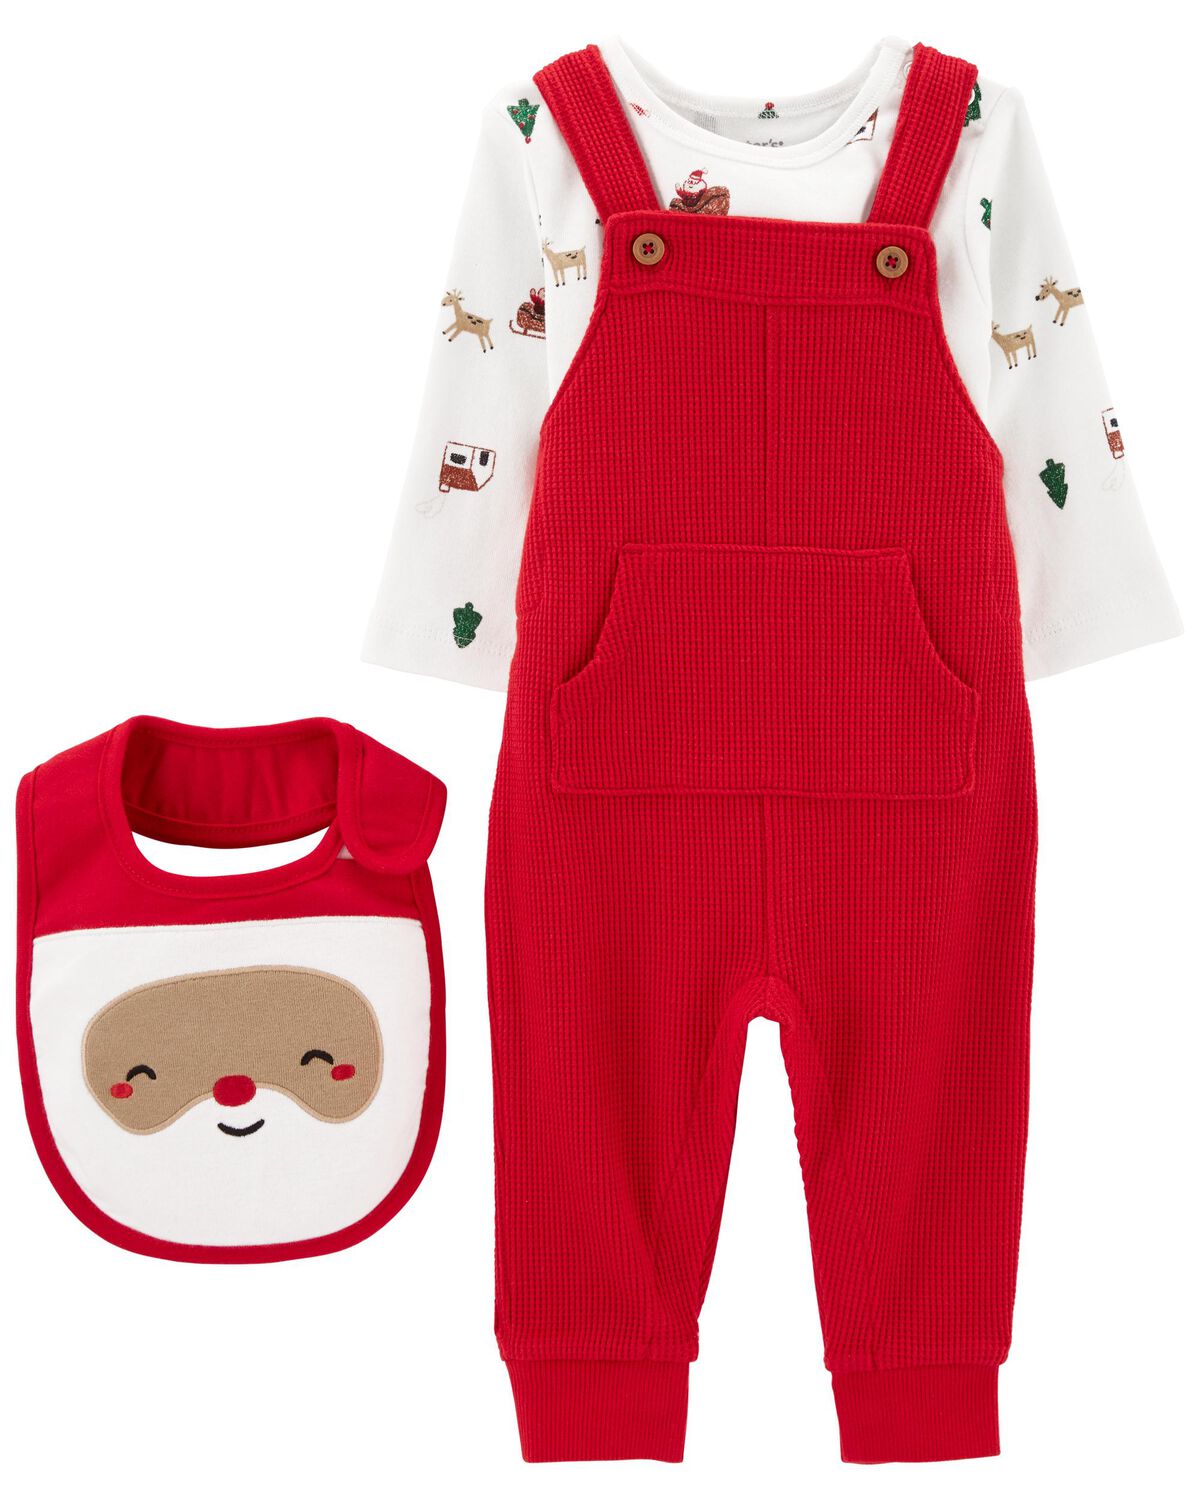 Baby 3-Piece Santa Outfit Set